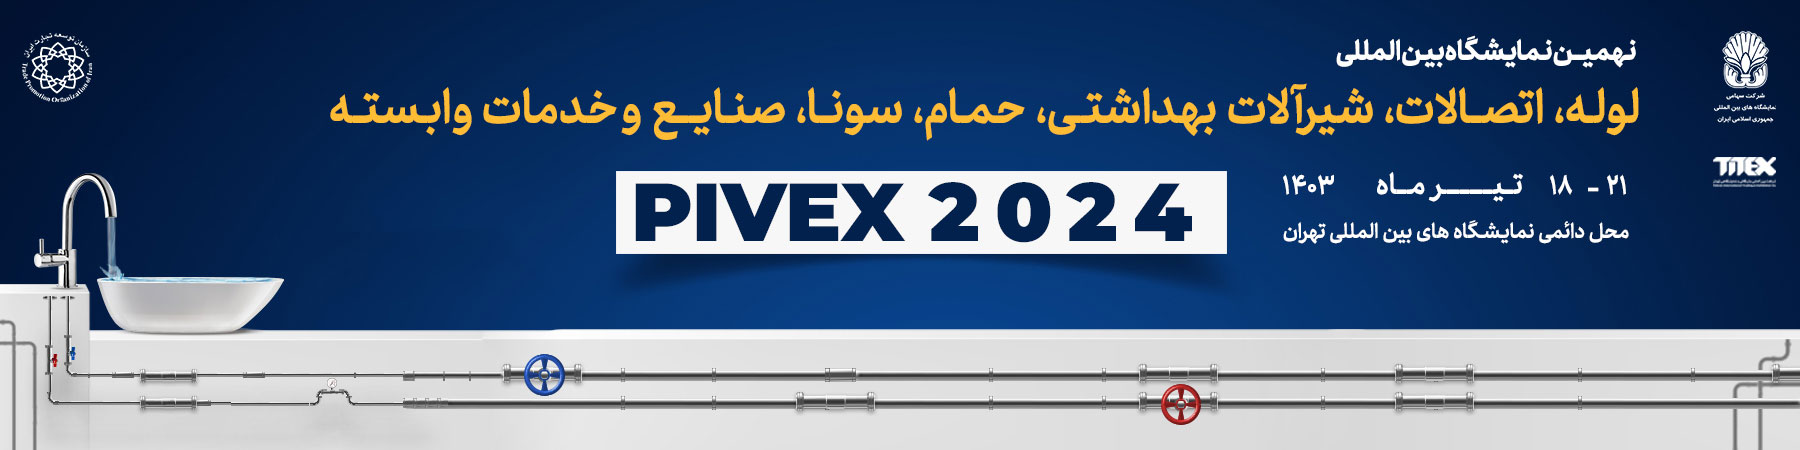 iran pivex 2024 poster new 03 - The 9th International Pipes, Fittings & Sanitary Valves Exhibition 2024 in Iran/Tehran